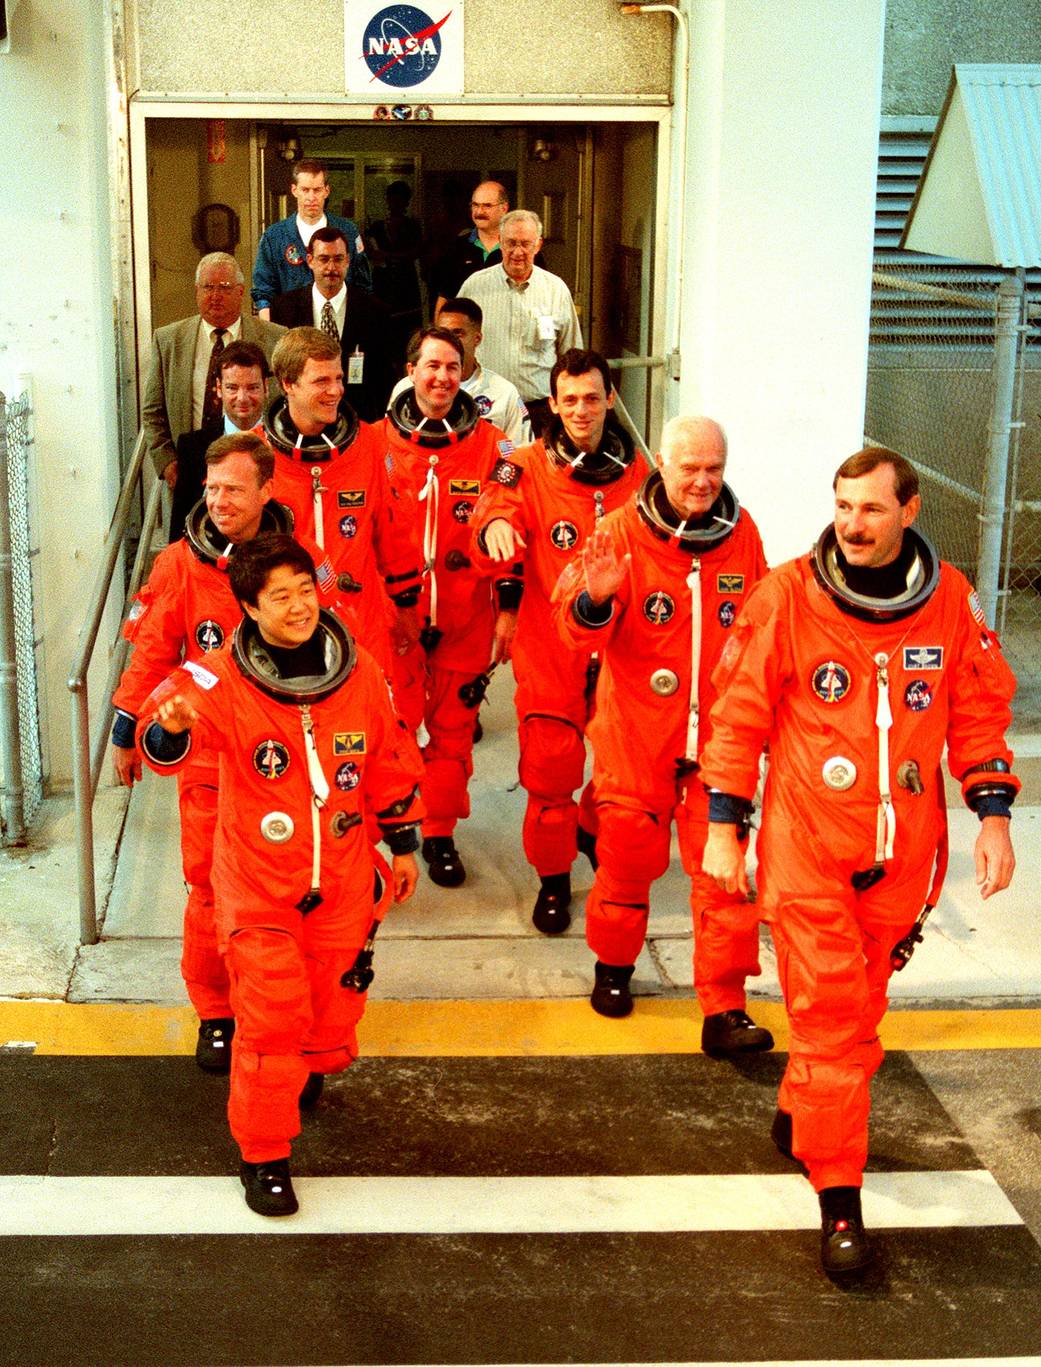 STS-95 crew members exit the Operations and Checkout Building where they suited up before leaving for Launch Pad 39-B on Oct. 9, 1998. John Glenn is second from the right. 